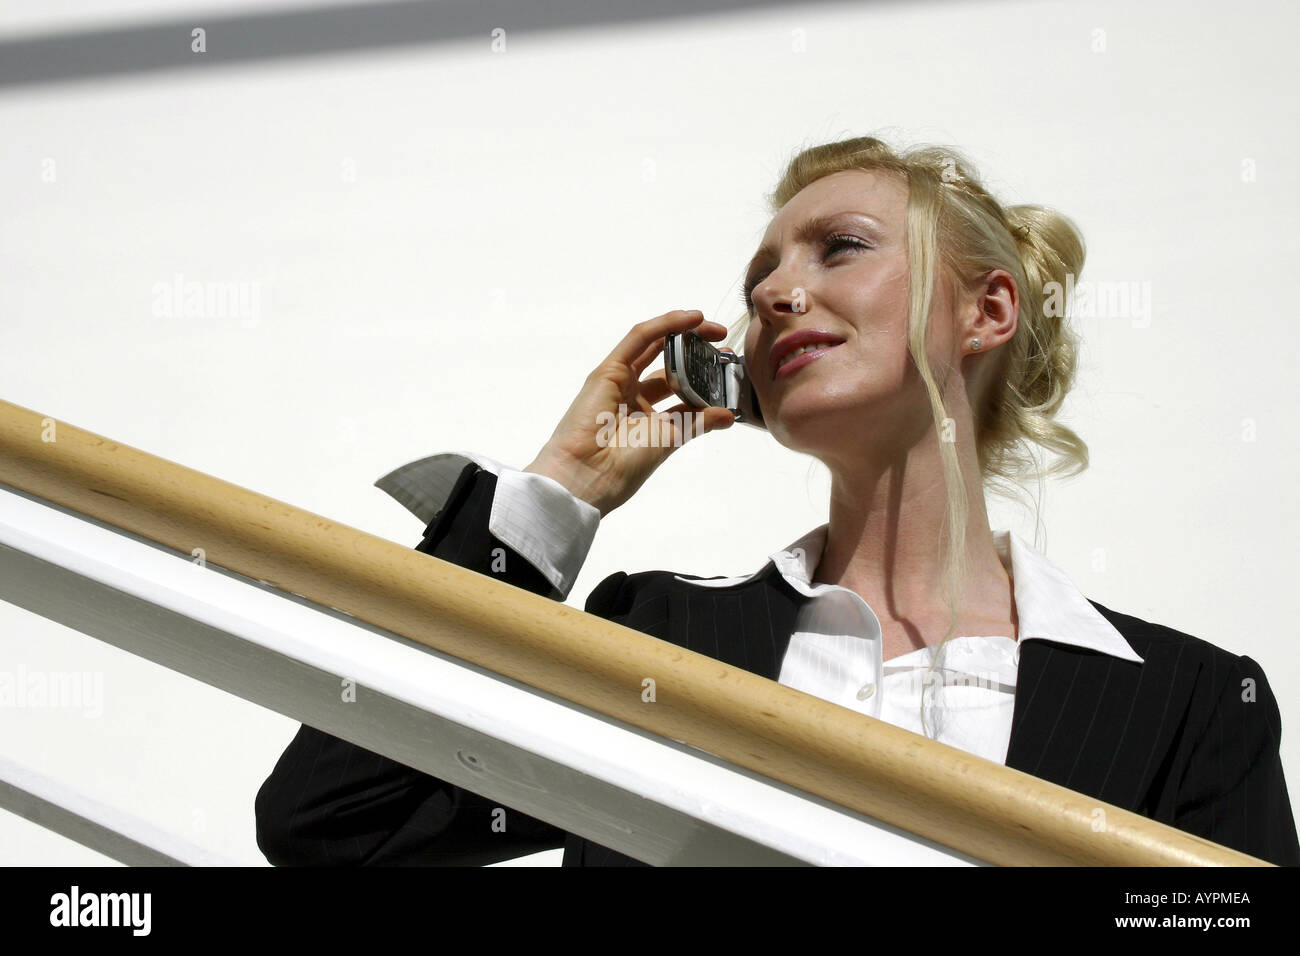 A professional woman converses over the mobile phone against the railing Stock Photo